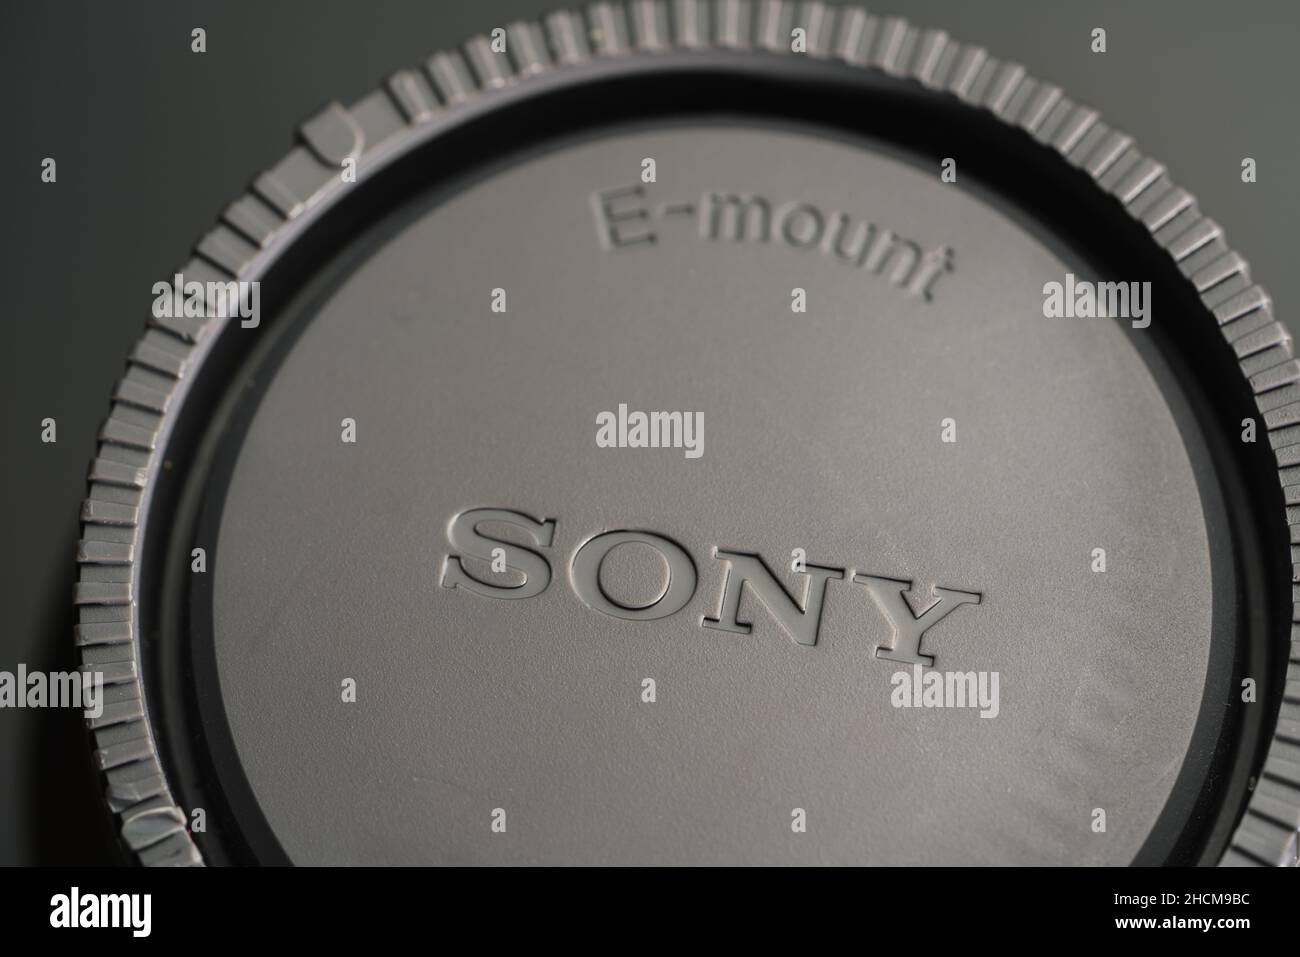 Sony logo on a lens cap. Sony is a Japanese multinational company that manufactures electronic products. Its headquarters are in Tokyo, Japan. Stock Photo